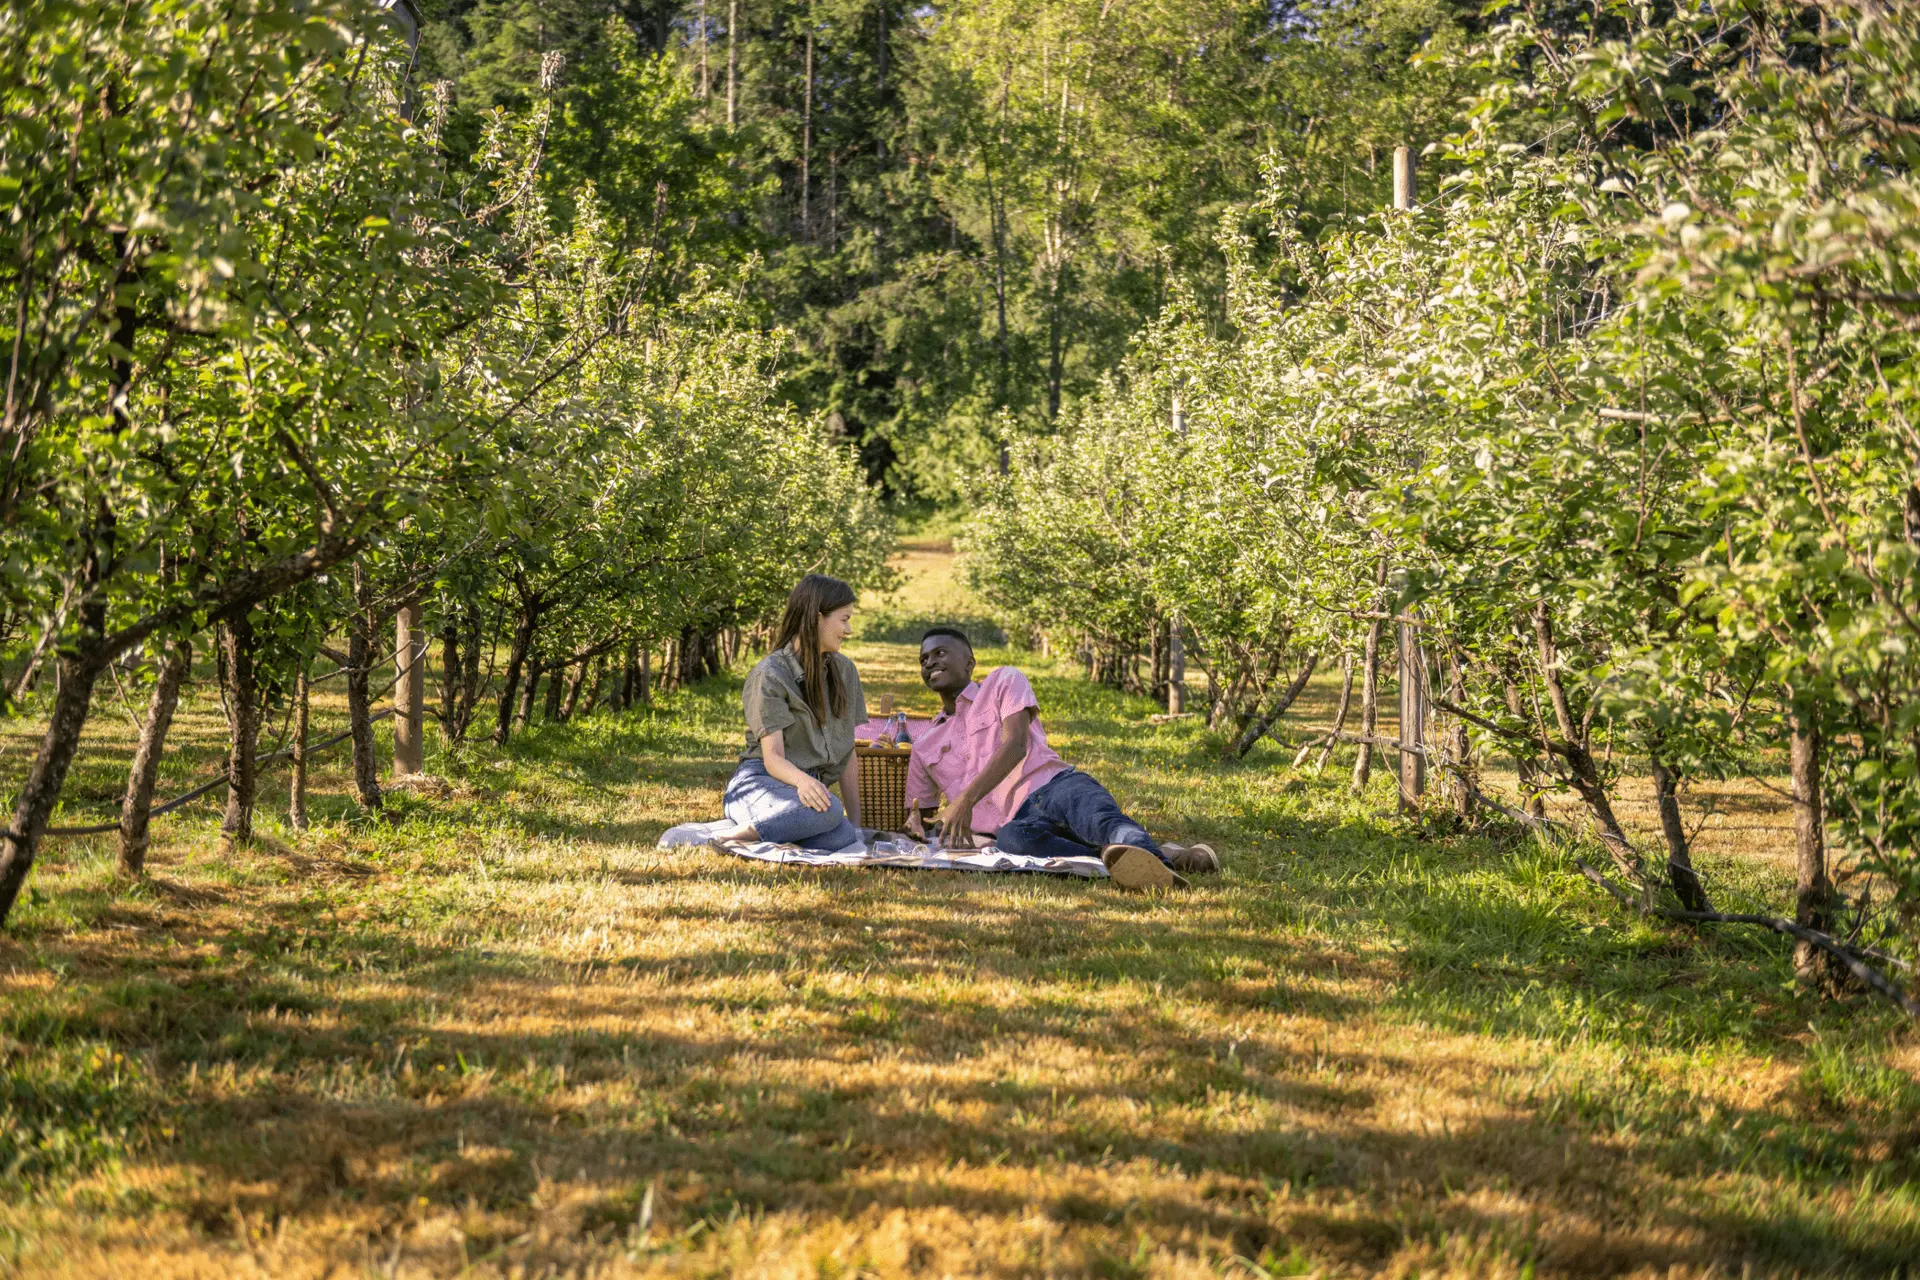 A couple having a picnic in a vineyard in Victoria, BC